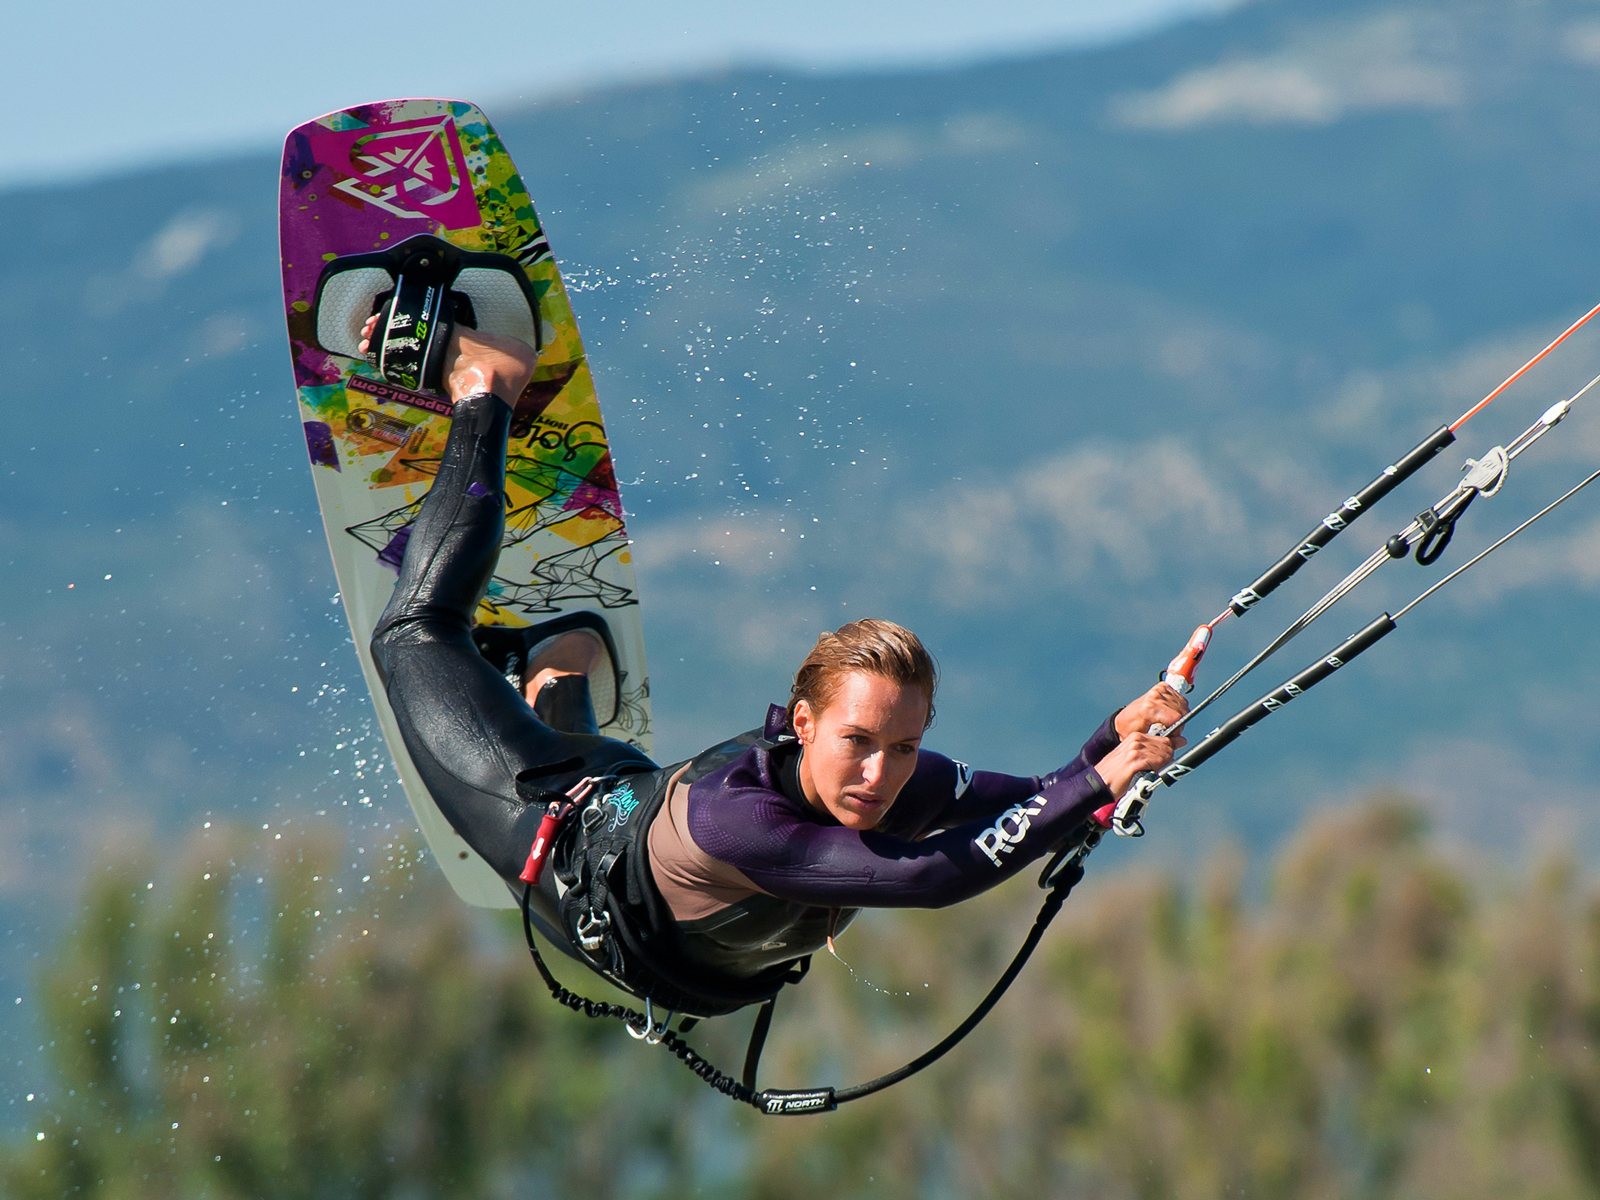 kitesurf wallpaper image - Angela Peral raily into town - in resolution: Standard 4:3 1600 X 1200